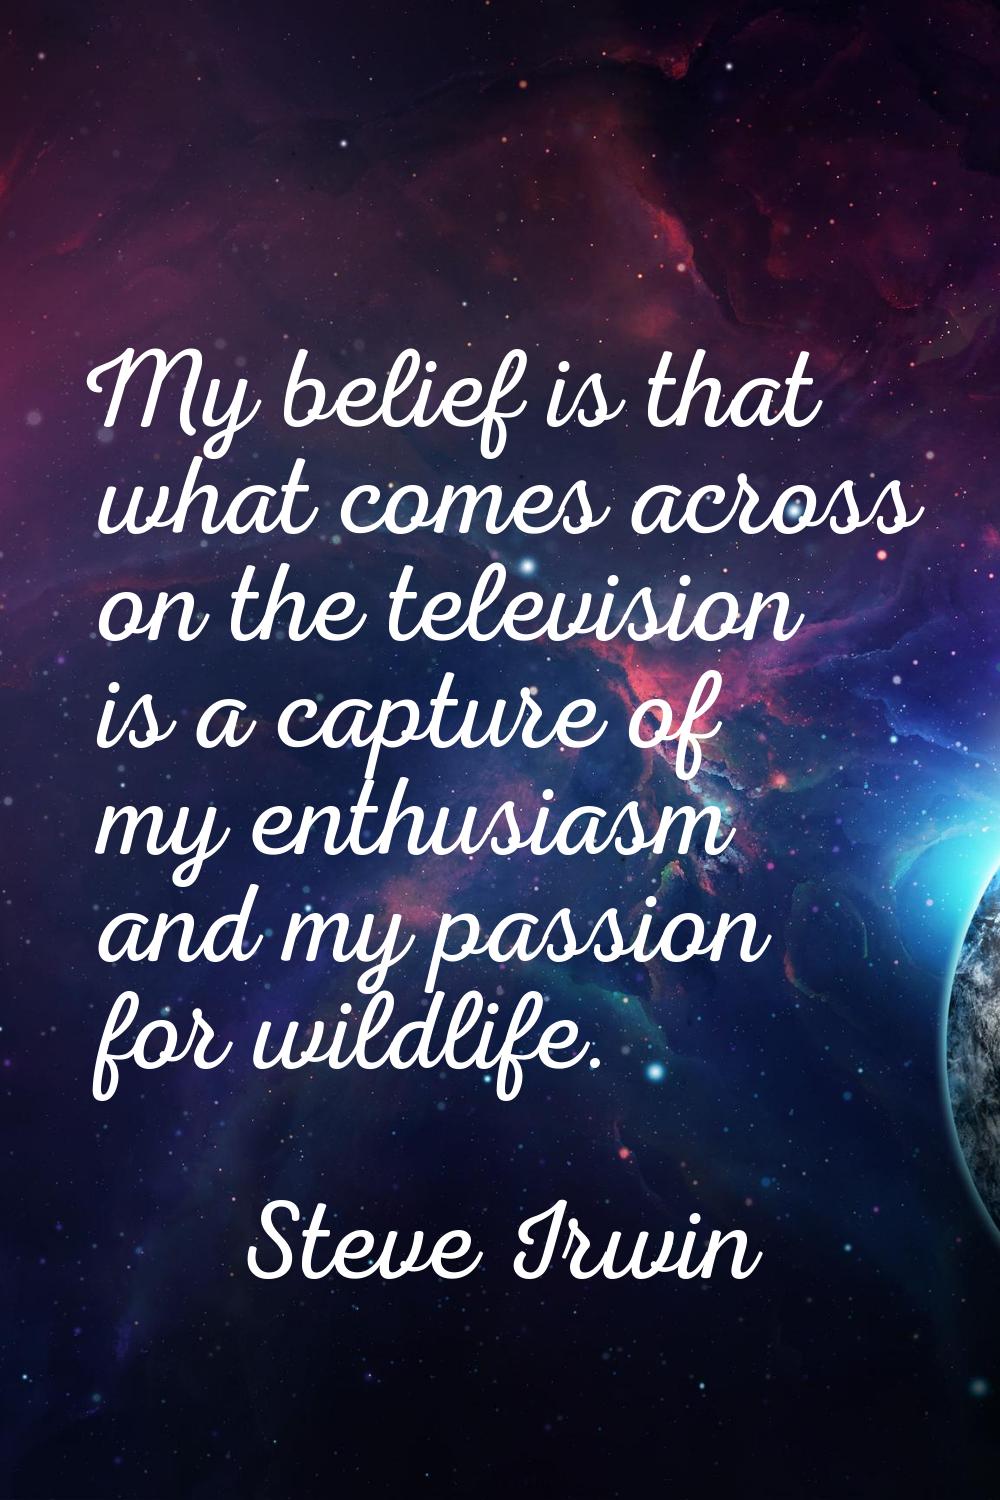 My belief is that what comes across on the television is a capture of my enthusiasm and my passion 